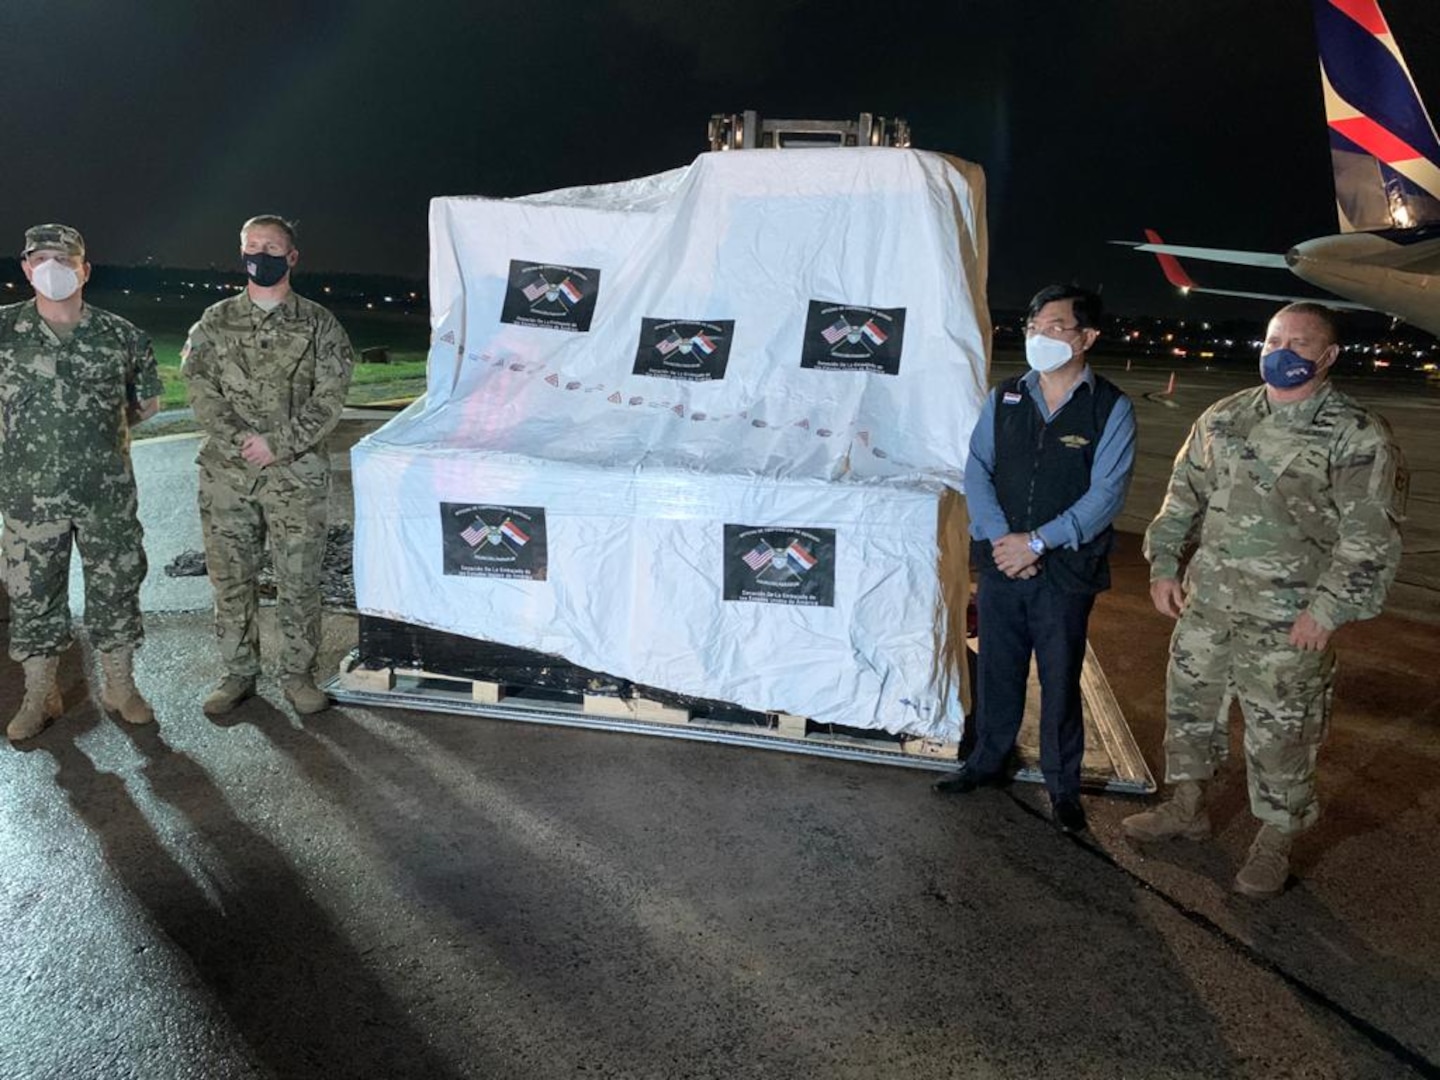 DLA, SOUTHCOM partnership Provides Humanitarian Support for COVID-19 Relief